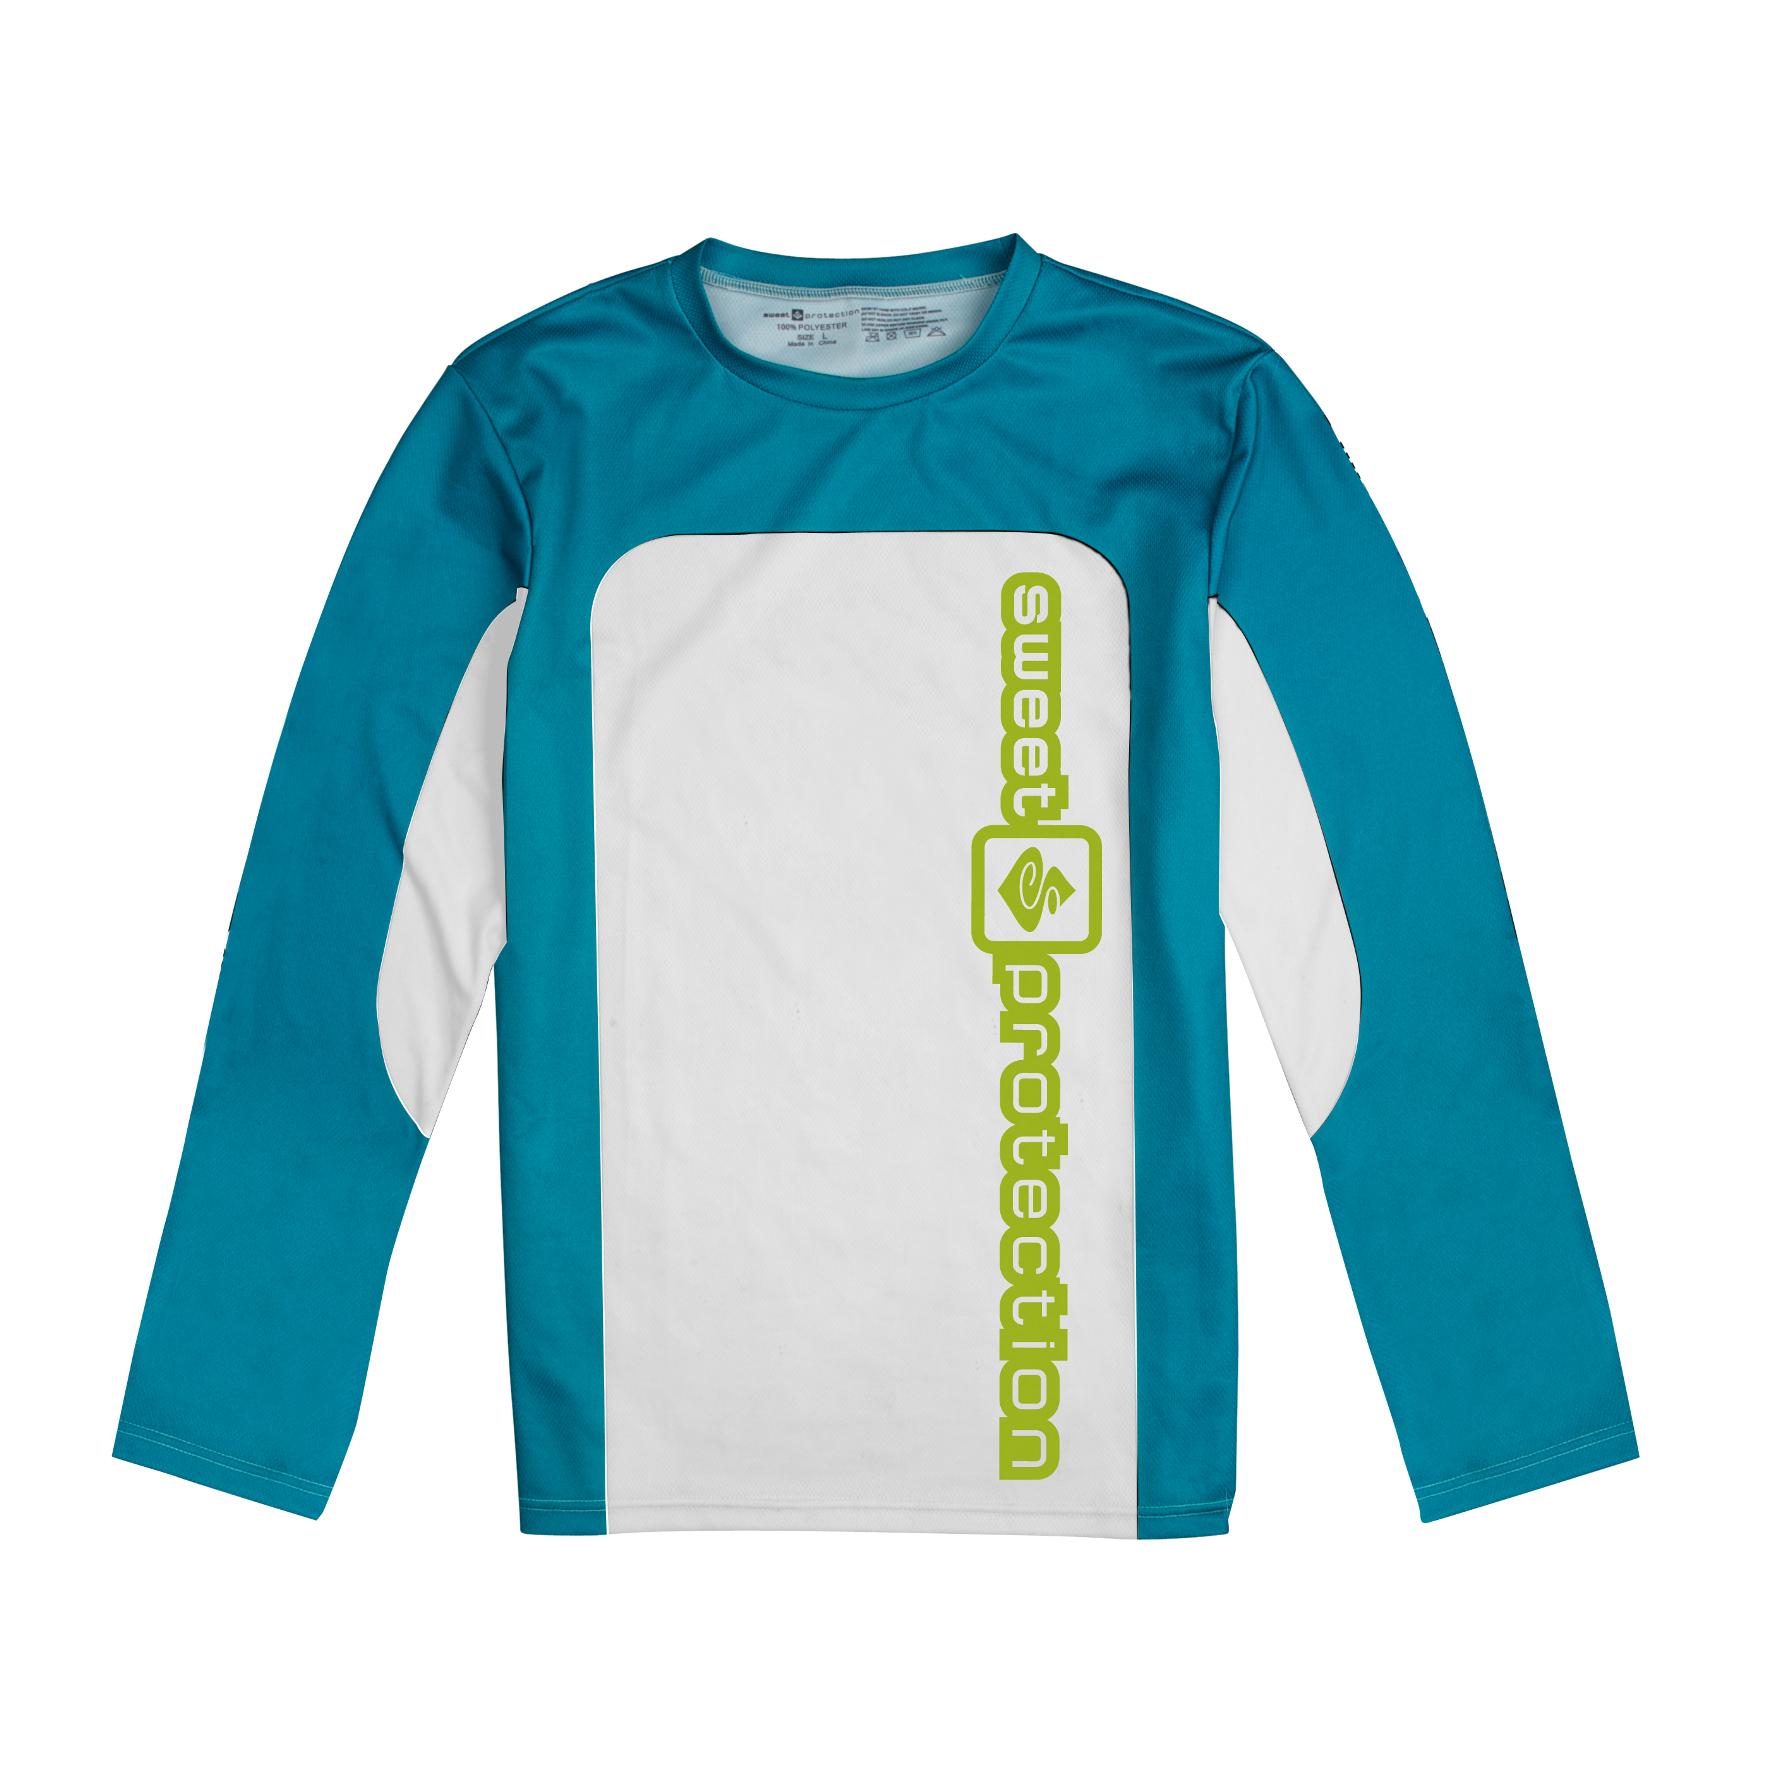 Foto Sweet Protection Mudride Jersey Downhill Hombre thunder blue/sno, l